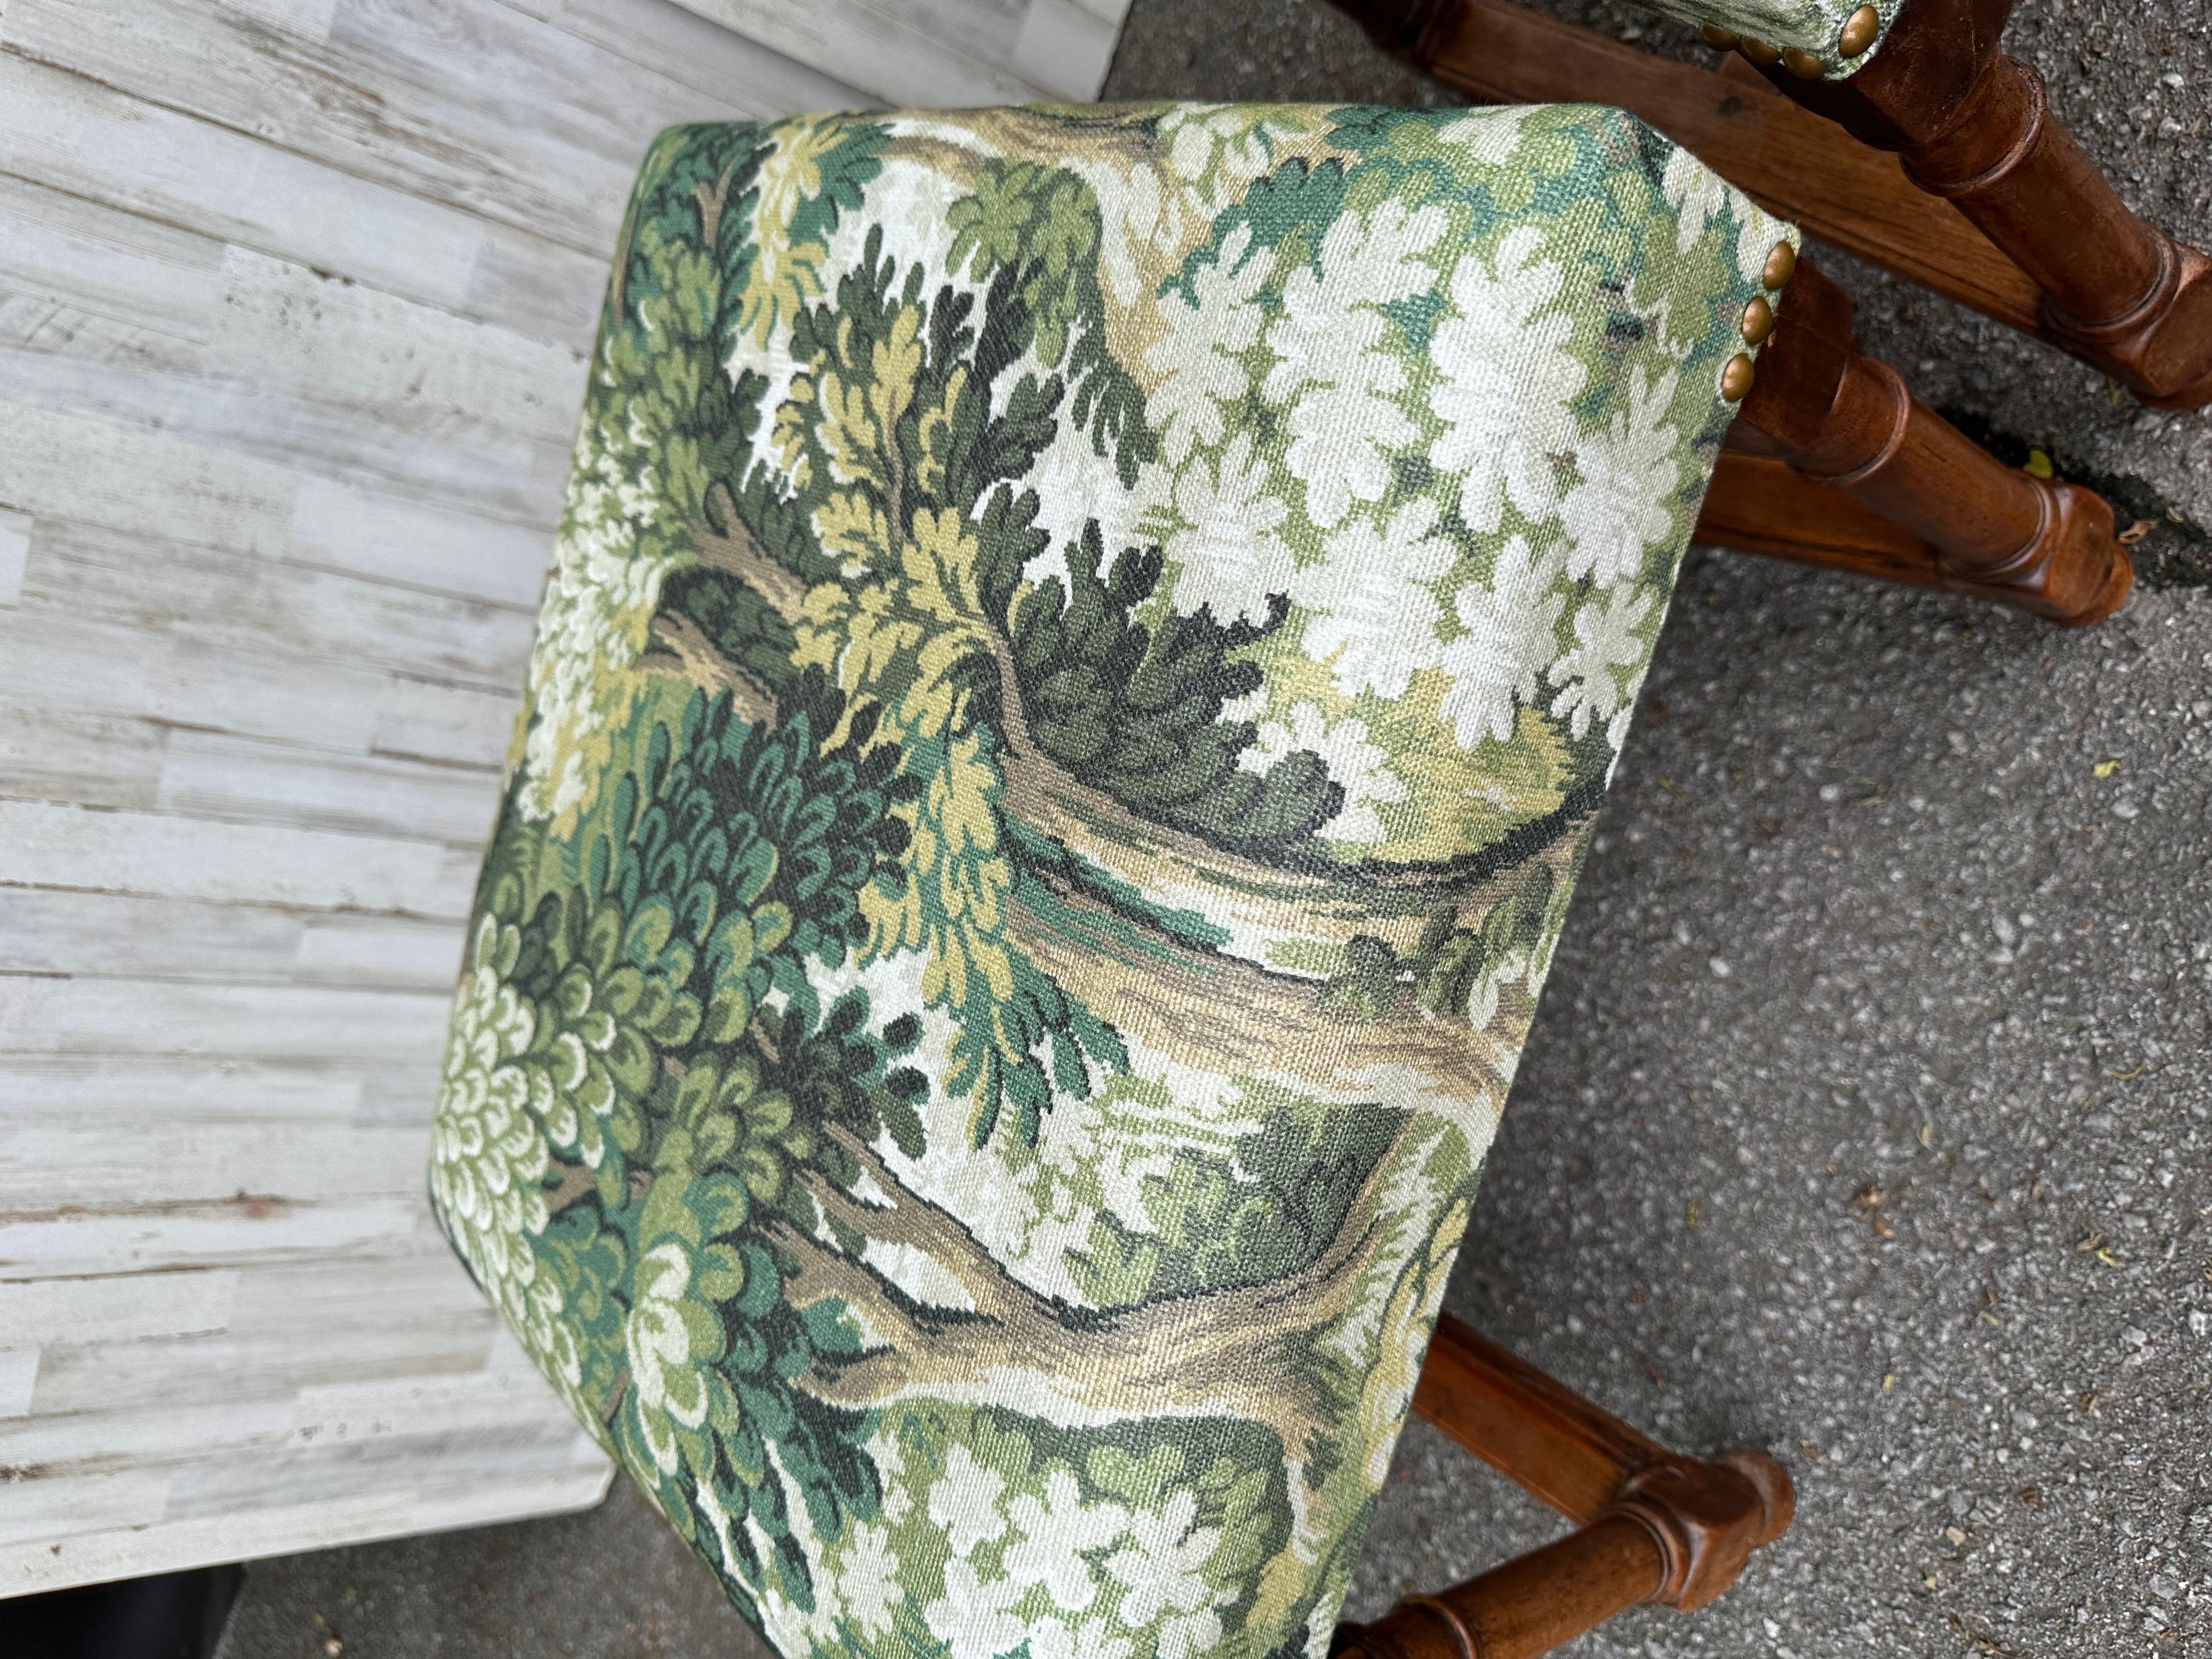 This is a beautiful pair of newly upholstered benches. The fabric is a stunning Multi color green forest scene . The base is solid, hand carved wood, rich brown color that pairs wonderfully with the green fabric and brass nail heads. These would